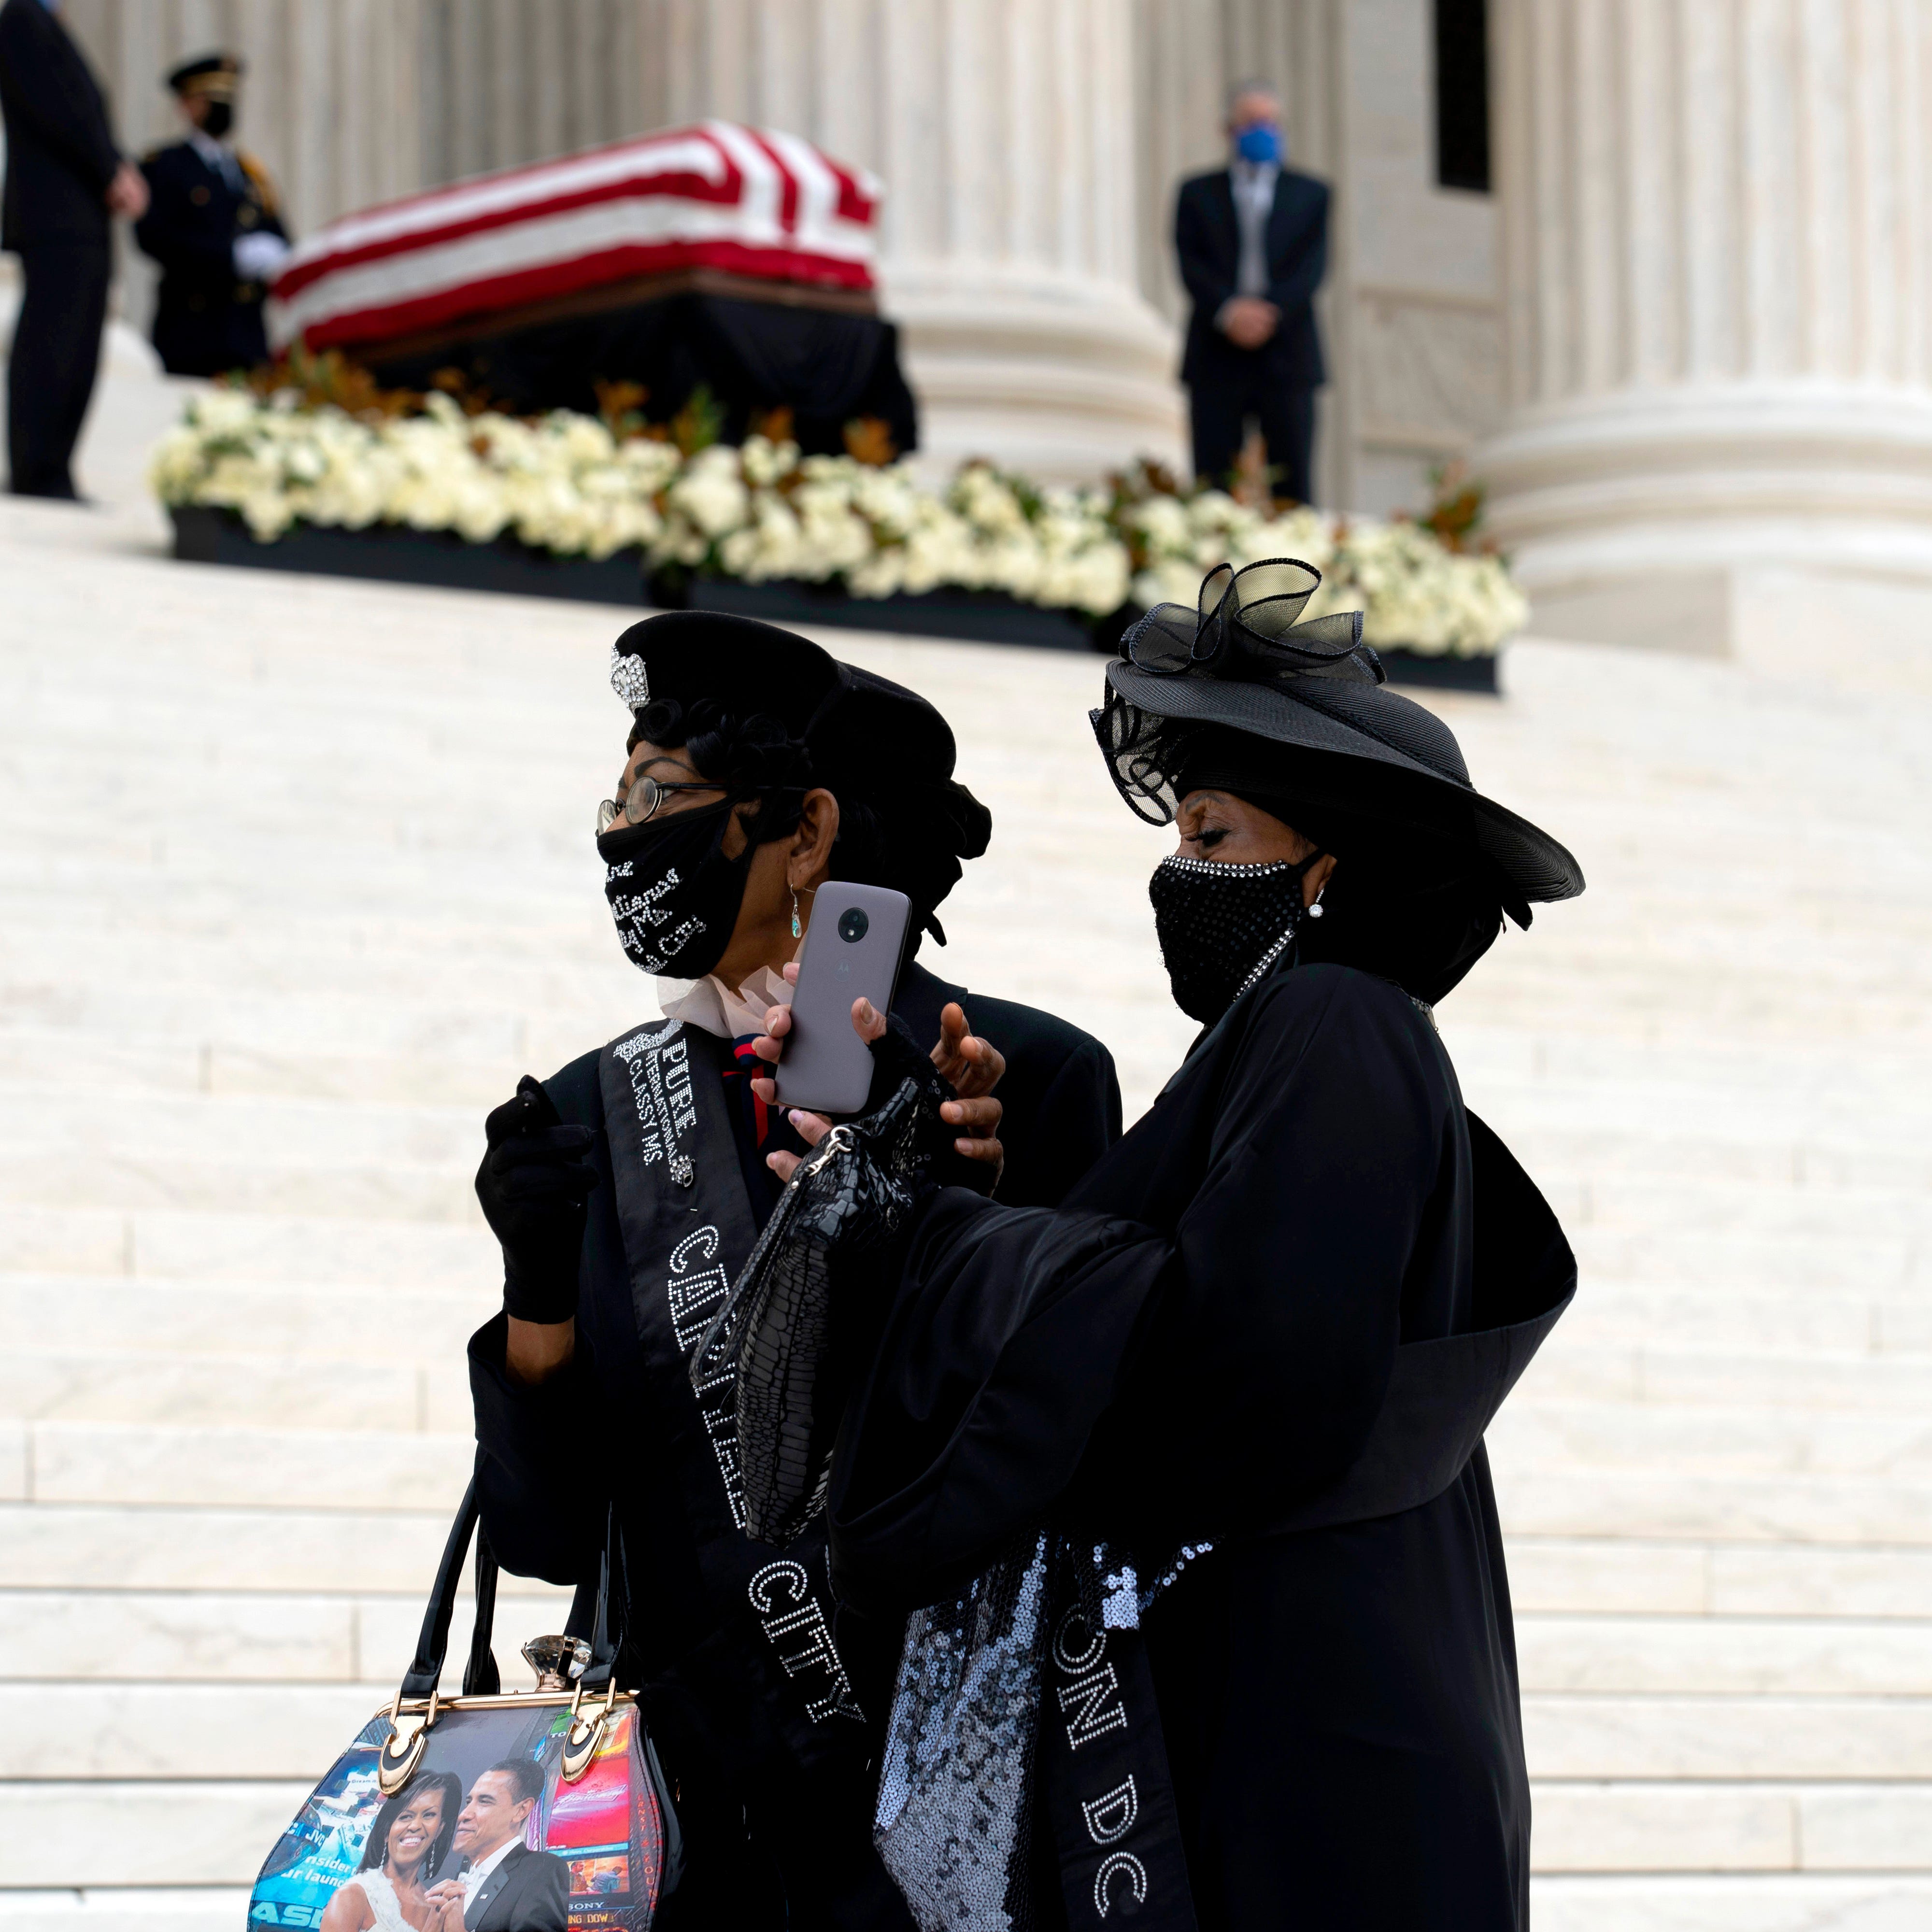 Mourners pay respects as Justice Ruth Bader Ginsburg lies in repose under the Portico at the top of the front steps of the U.S. Supreme Court building on Thursday, Sept. 24, 2020, in Washington.